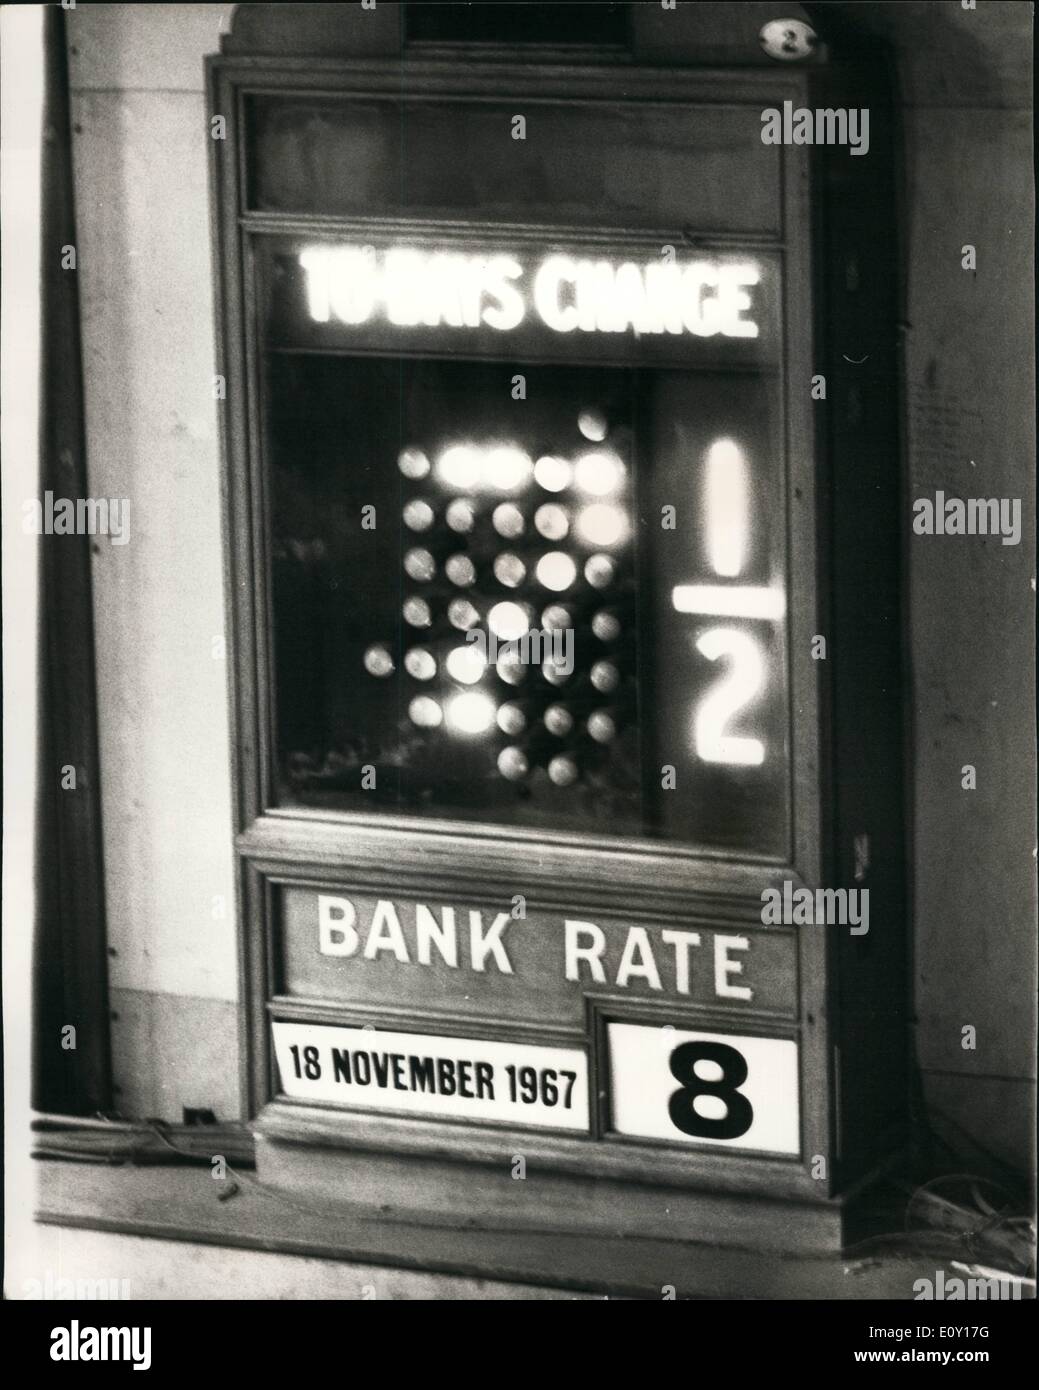 Mar. 03, 1968 - Bank Rate down to 7 1/2%. Photo shows after today's Bank Rate change to 7 1/2% from 8% the new Bank Rate is indicated on a board, at the Stock Exchange. Stock Photo